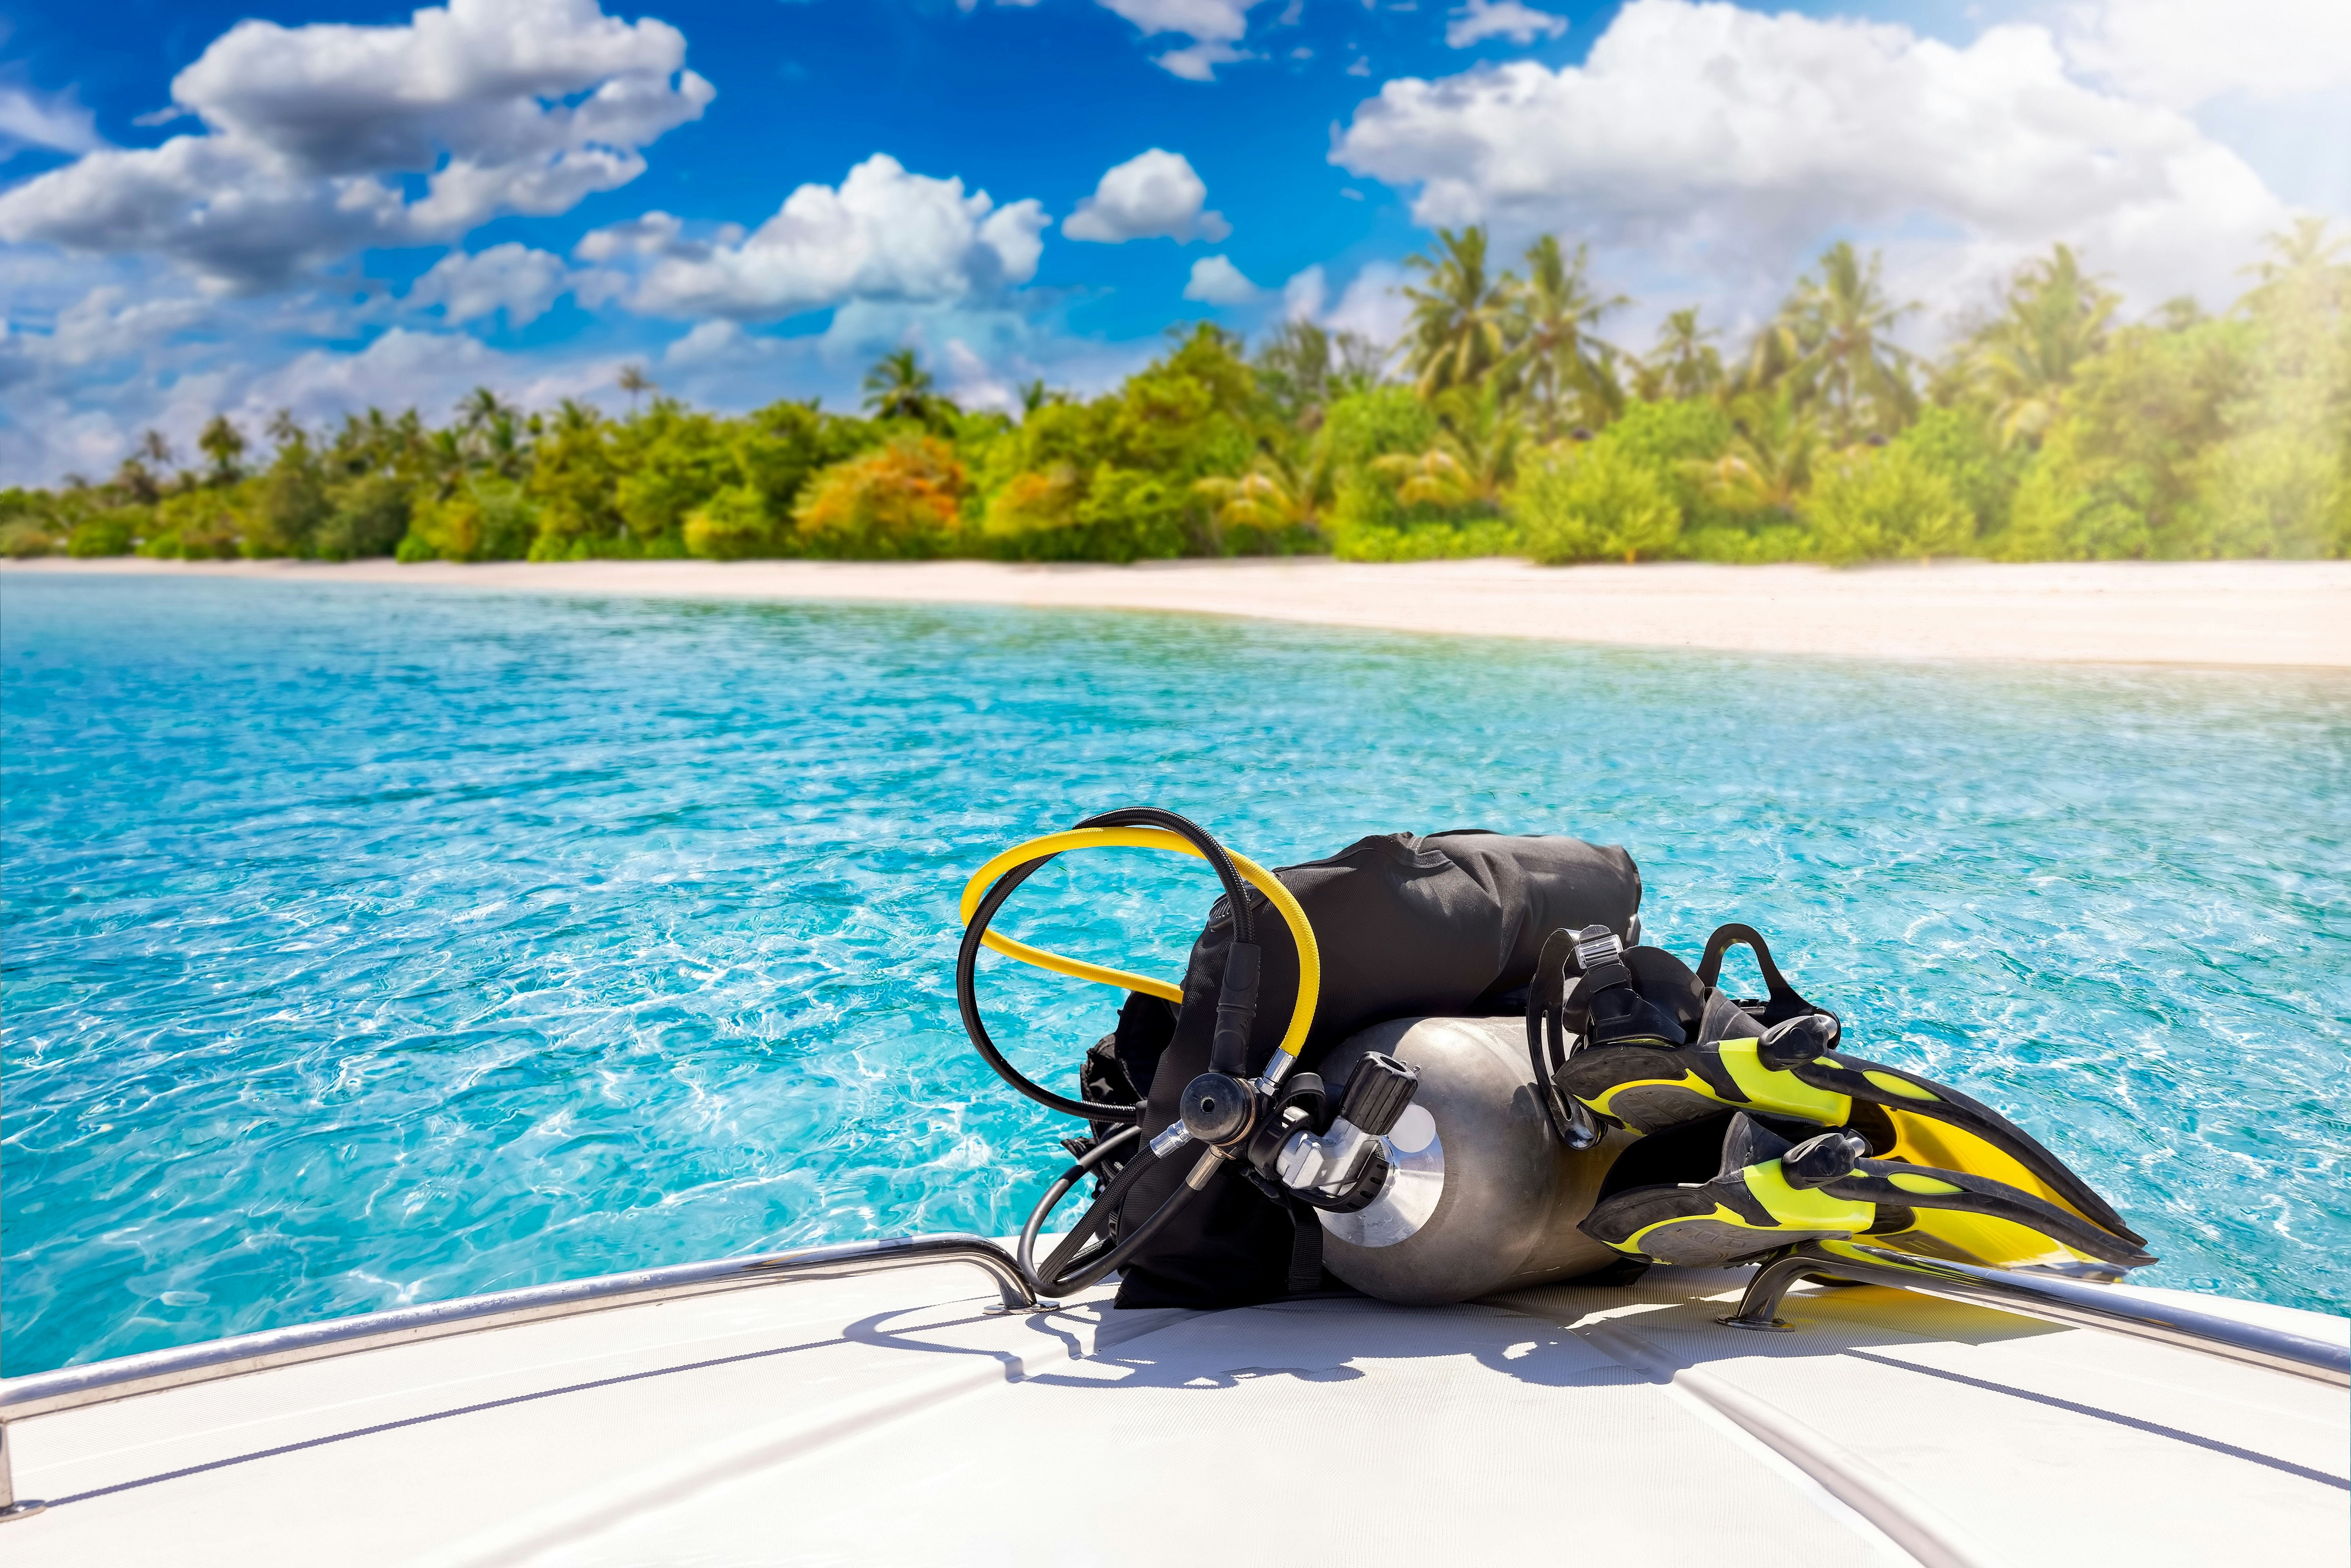 In order to make diving and exploring underwater beauty enjoyable, it is really essential to prioritise safety first and foremost